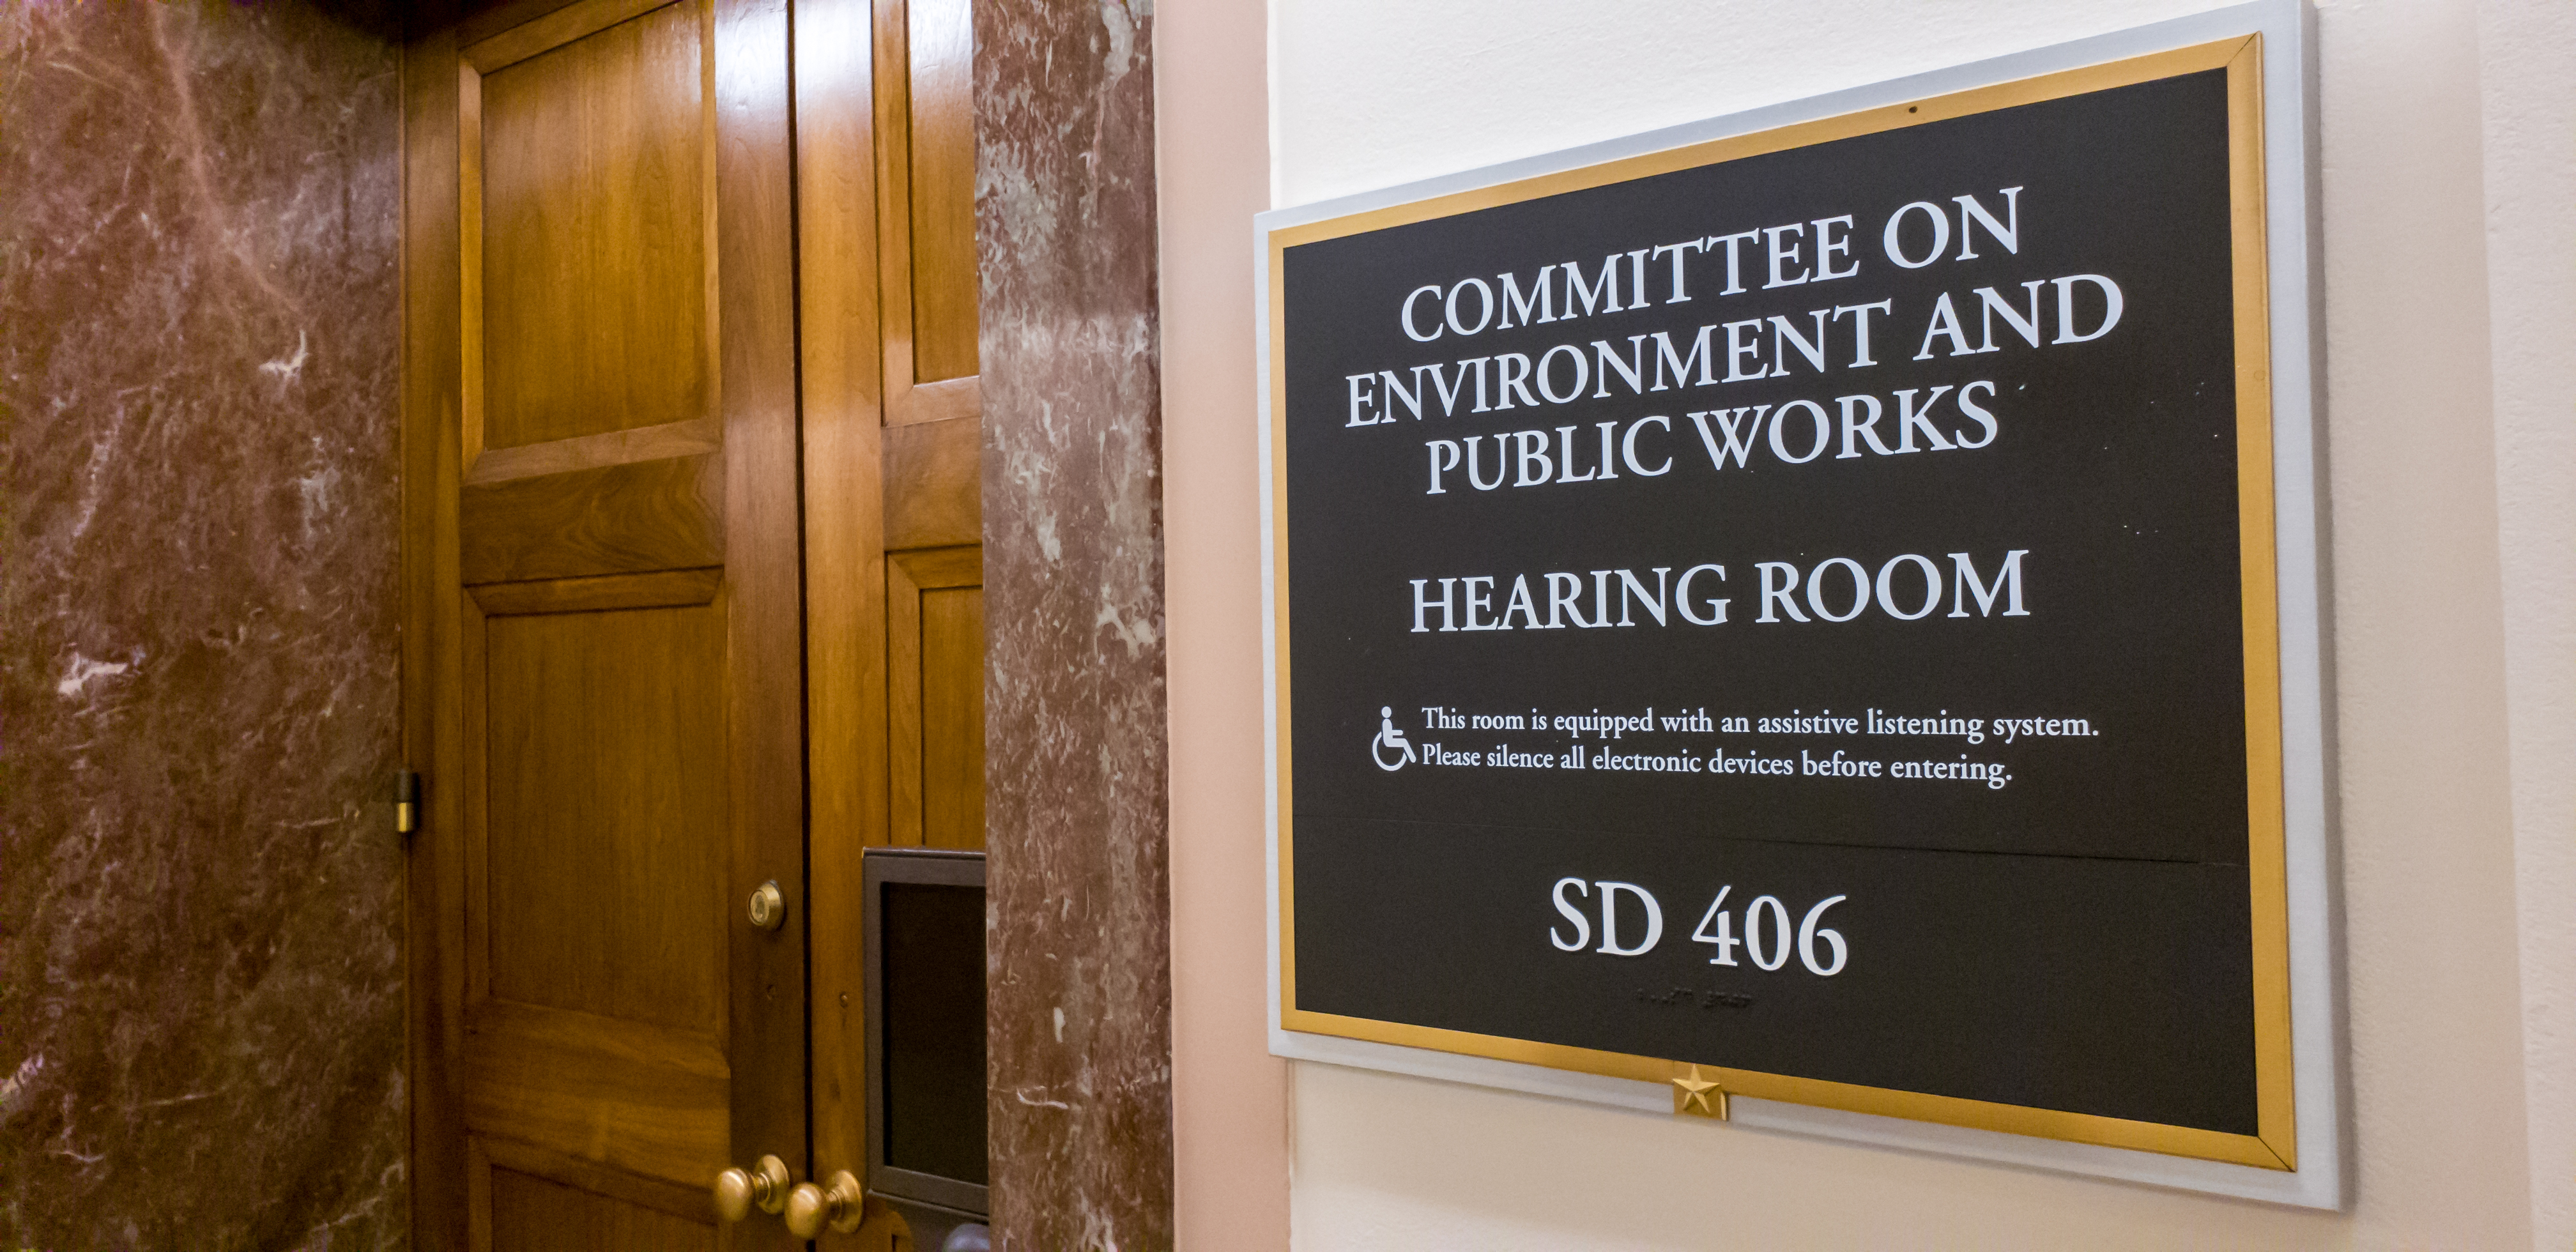 Senate Committee Environment and Public Works Hearing Room